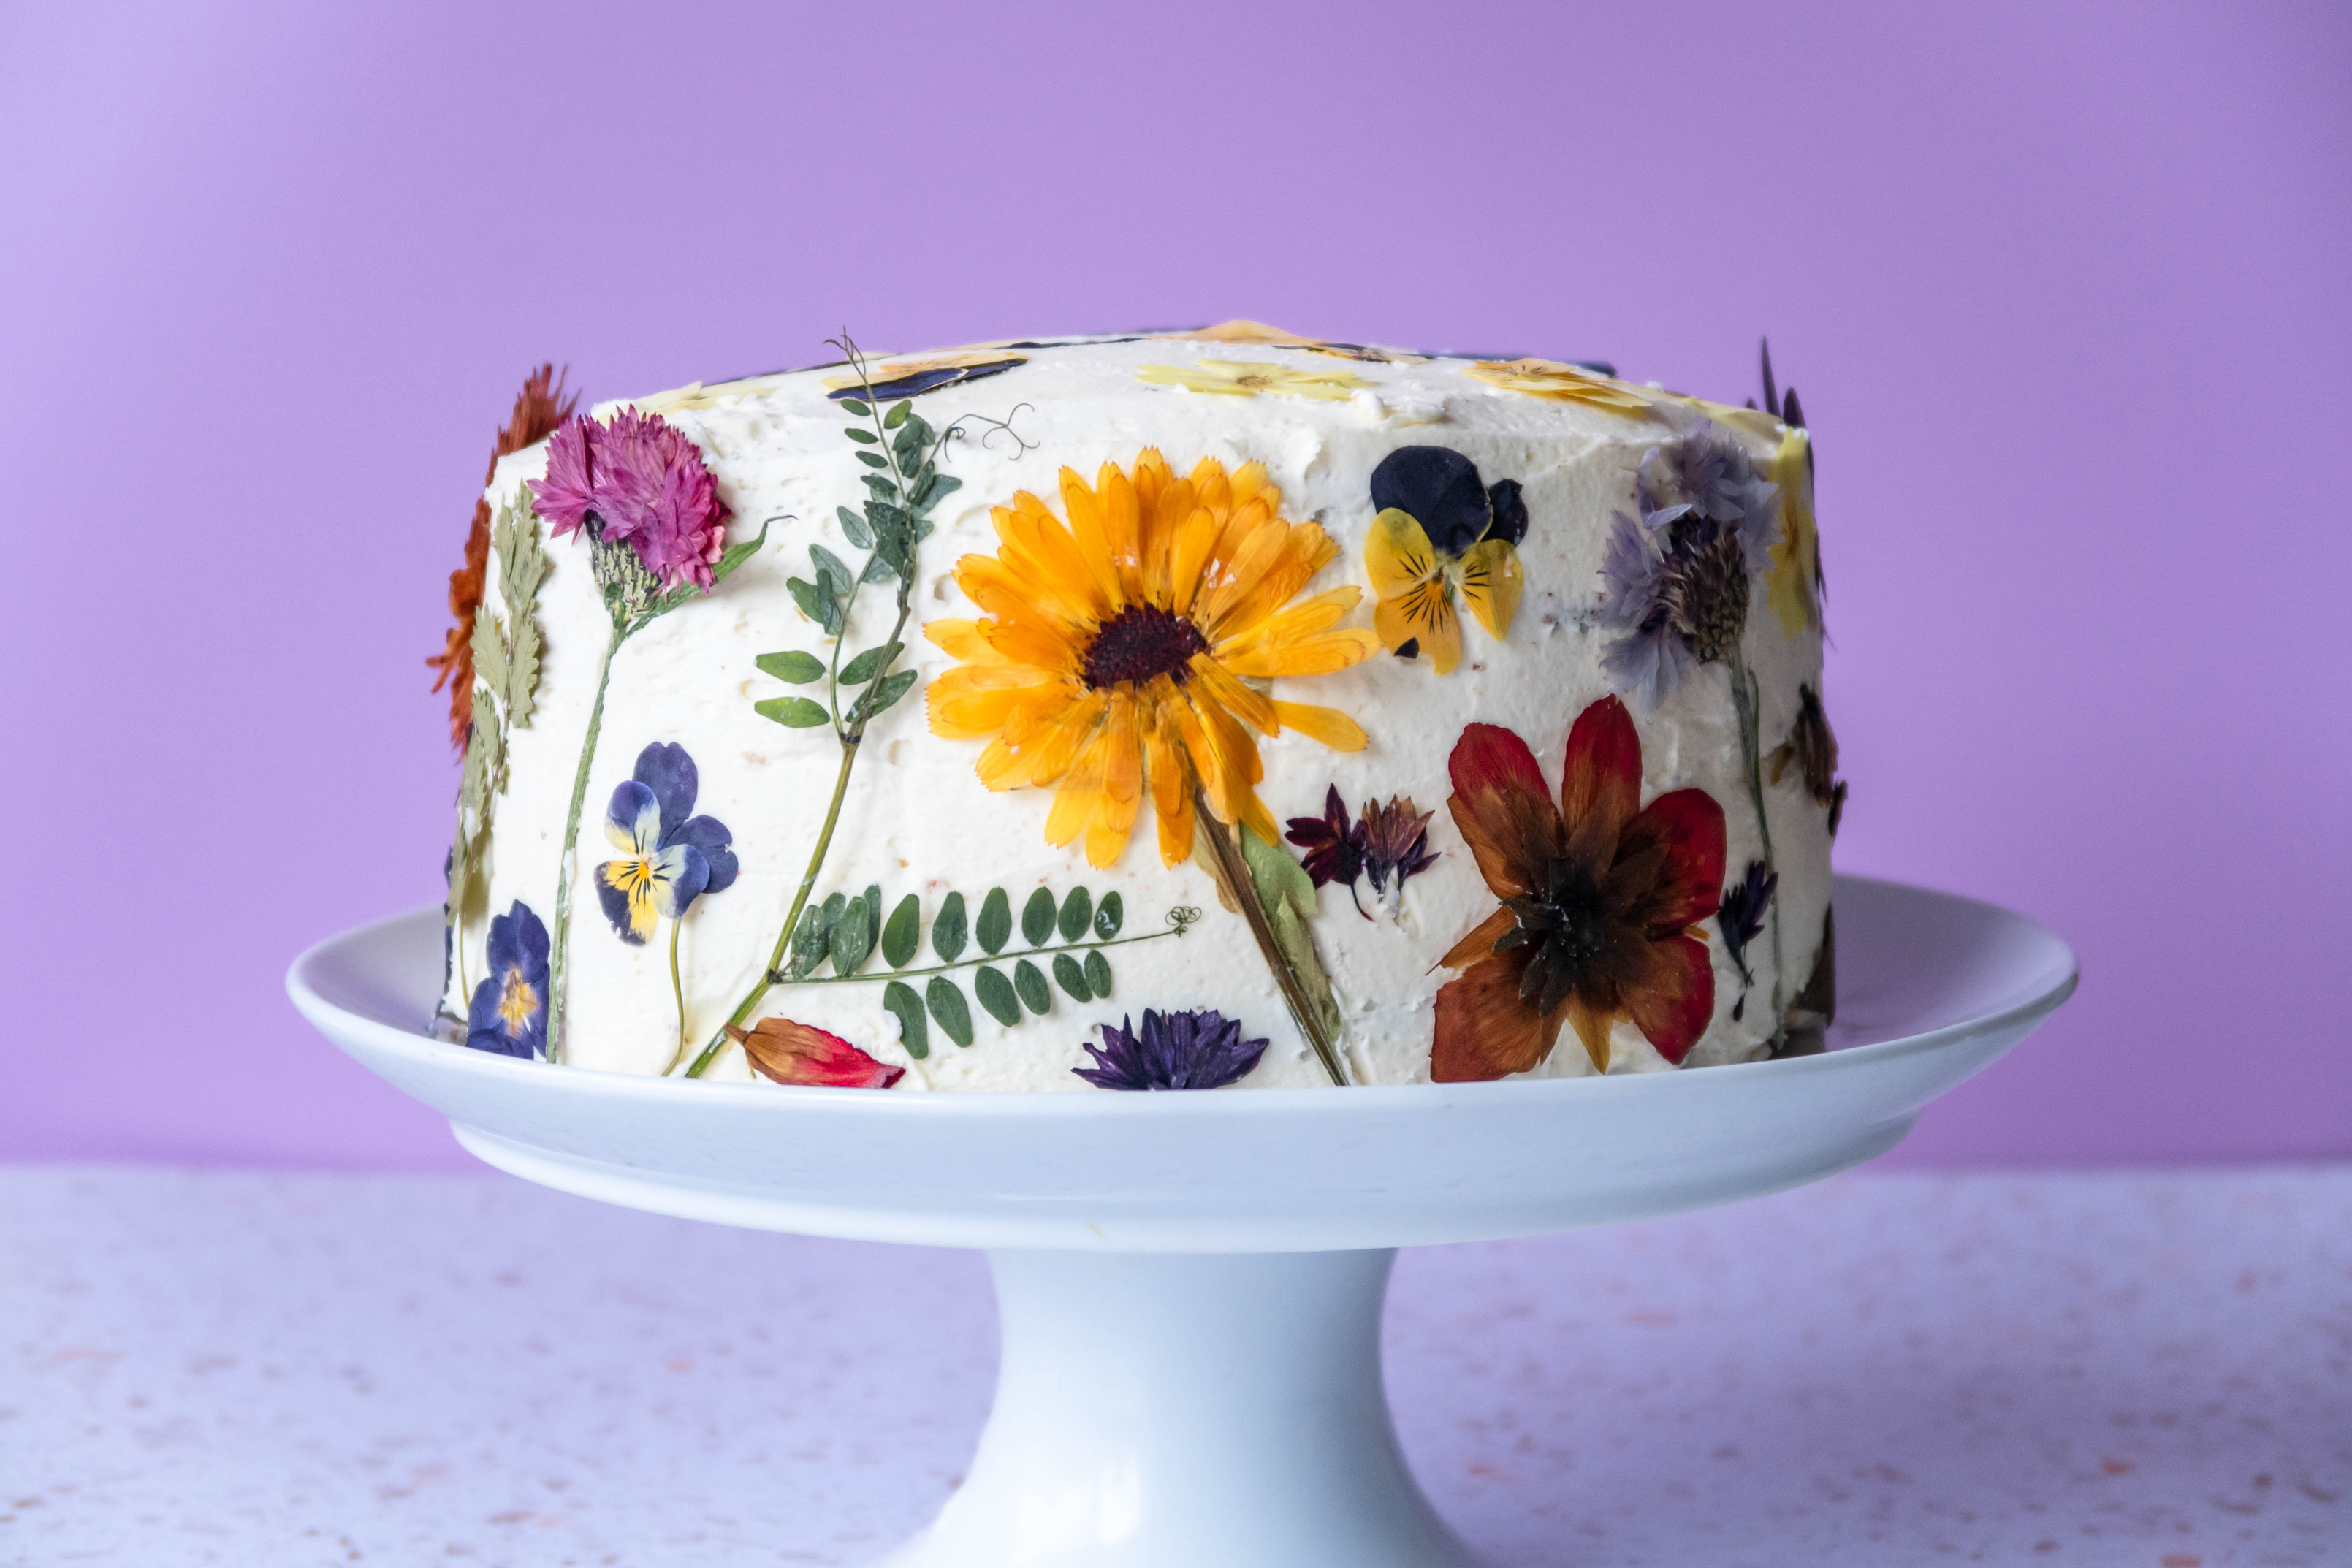 20 Edible Flower Recipes To Satisfy Your Taste Buds